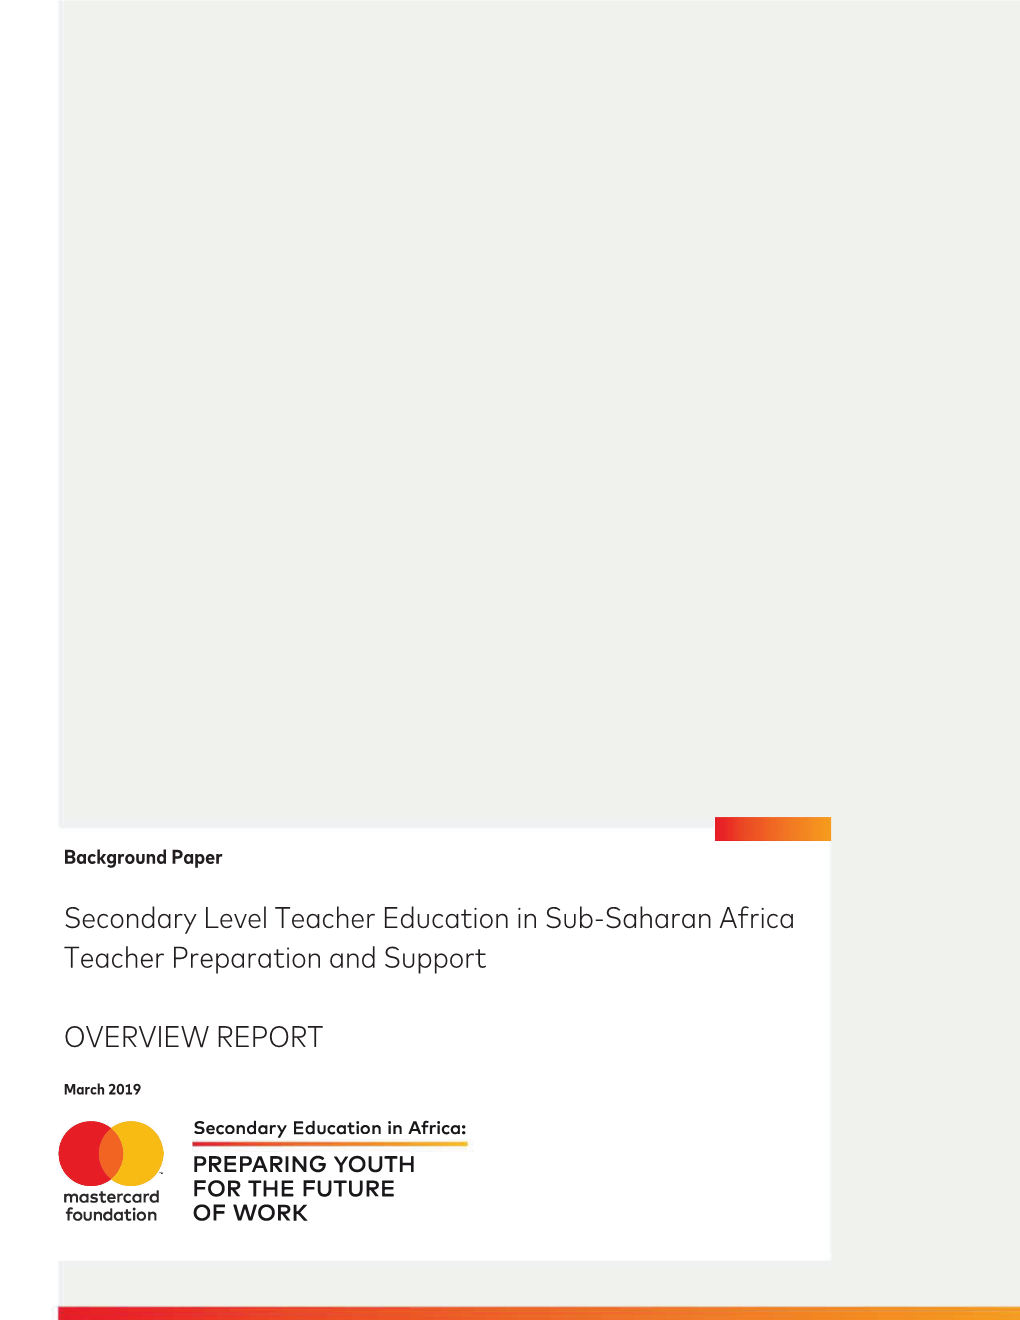 SECONDARY LEVEL TEACHER EDUCATION in SUB-SAHARAN AFRICA Teacher Preparation and Support OVERVIEW REPORT